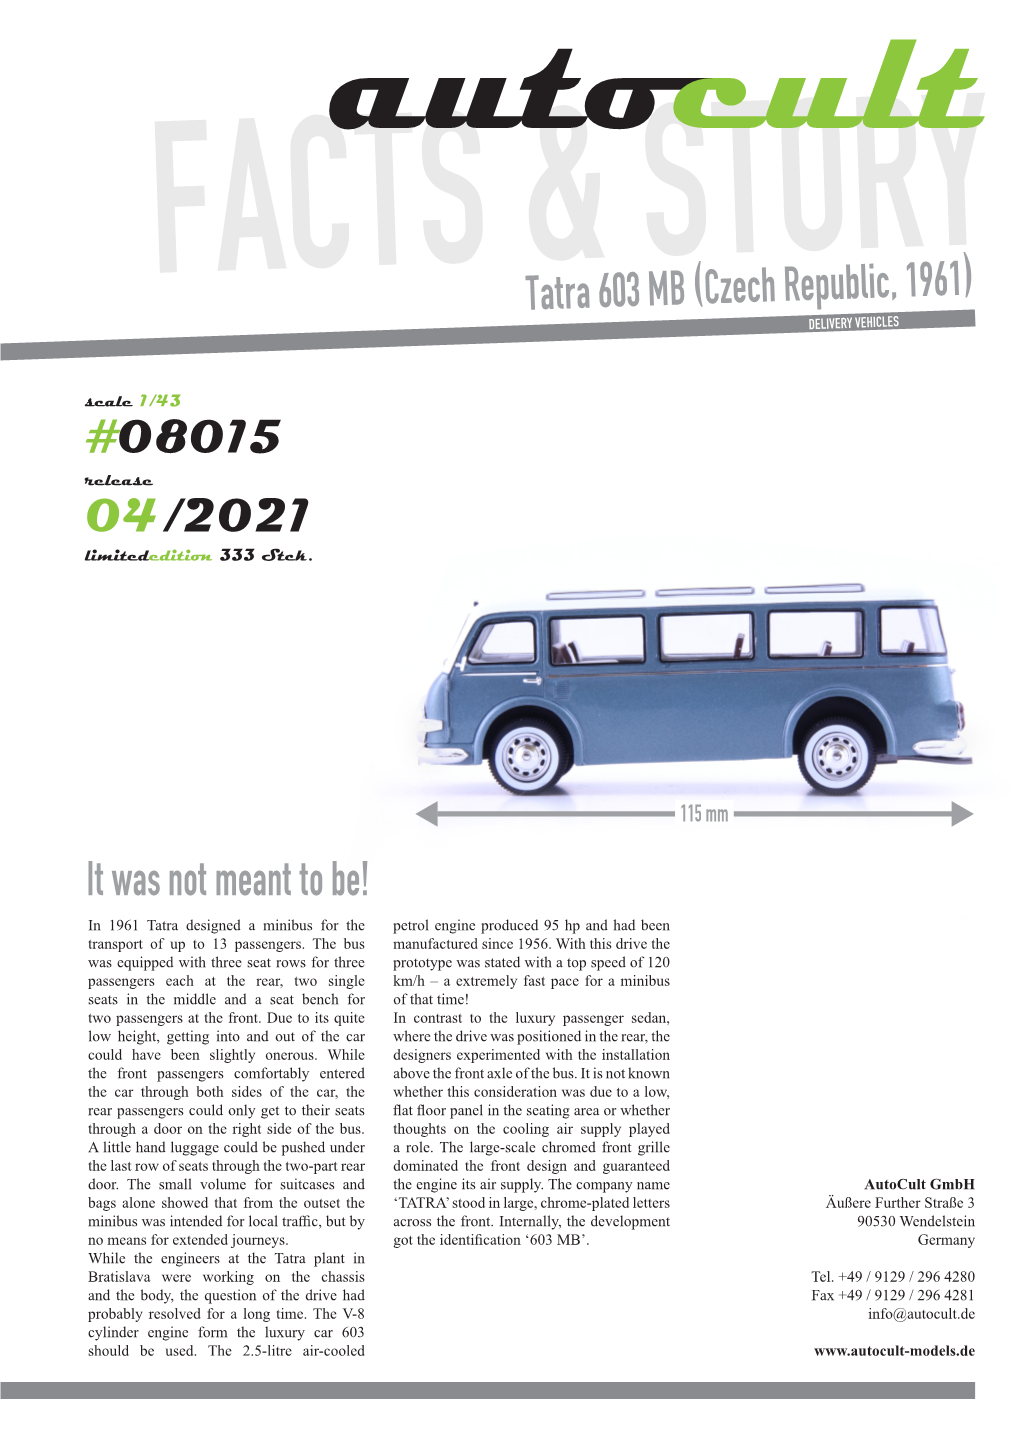 It Was Not Meant to Be! in 1961 Tatra Designed a Minibus for the Petrol Engine Produced 95 Hp and Had Been Transport of up to 13 Passengers